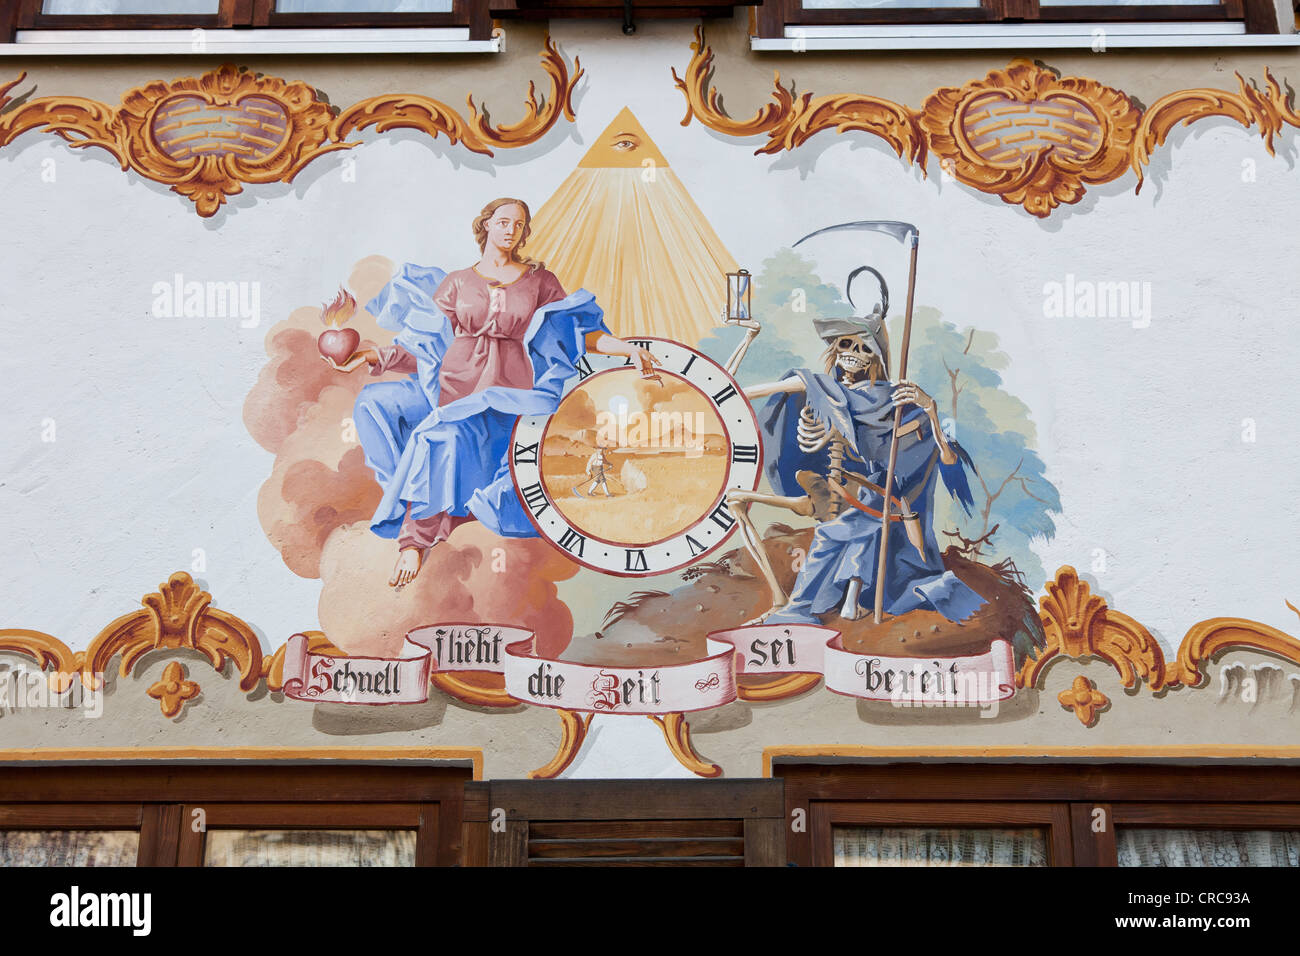 Wall art or Trompe L'oeil painting on a building in Oberammergau, Germany, this art was painted in 1883. Stock Photo